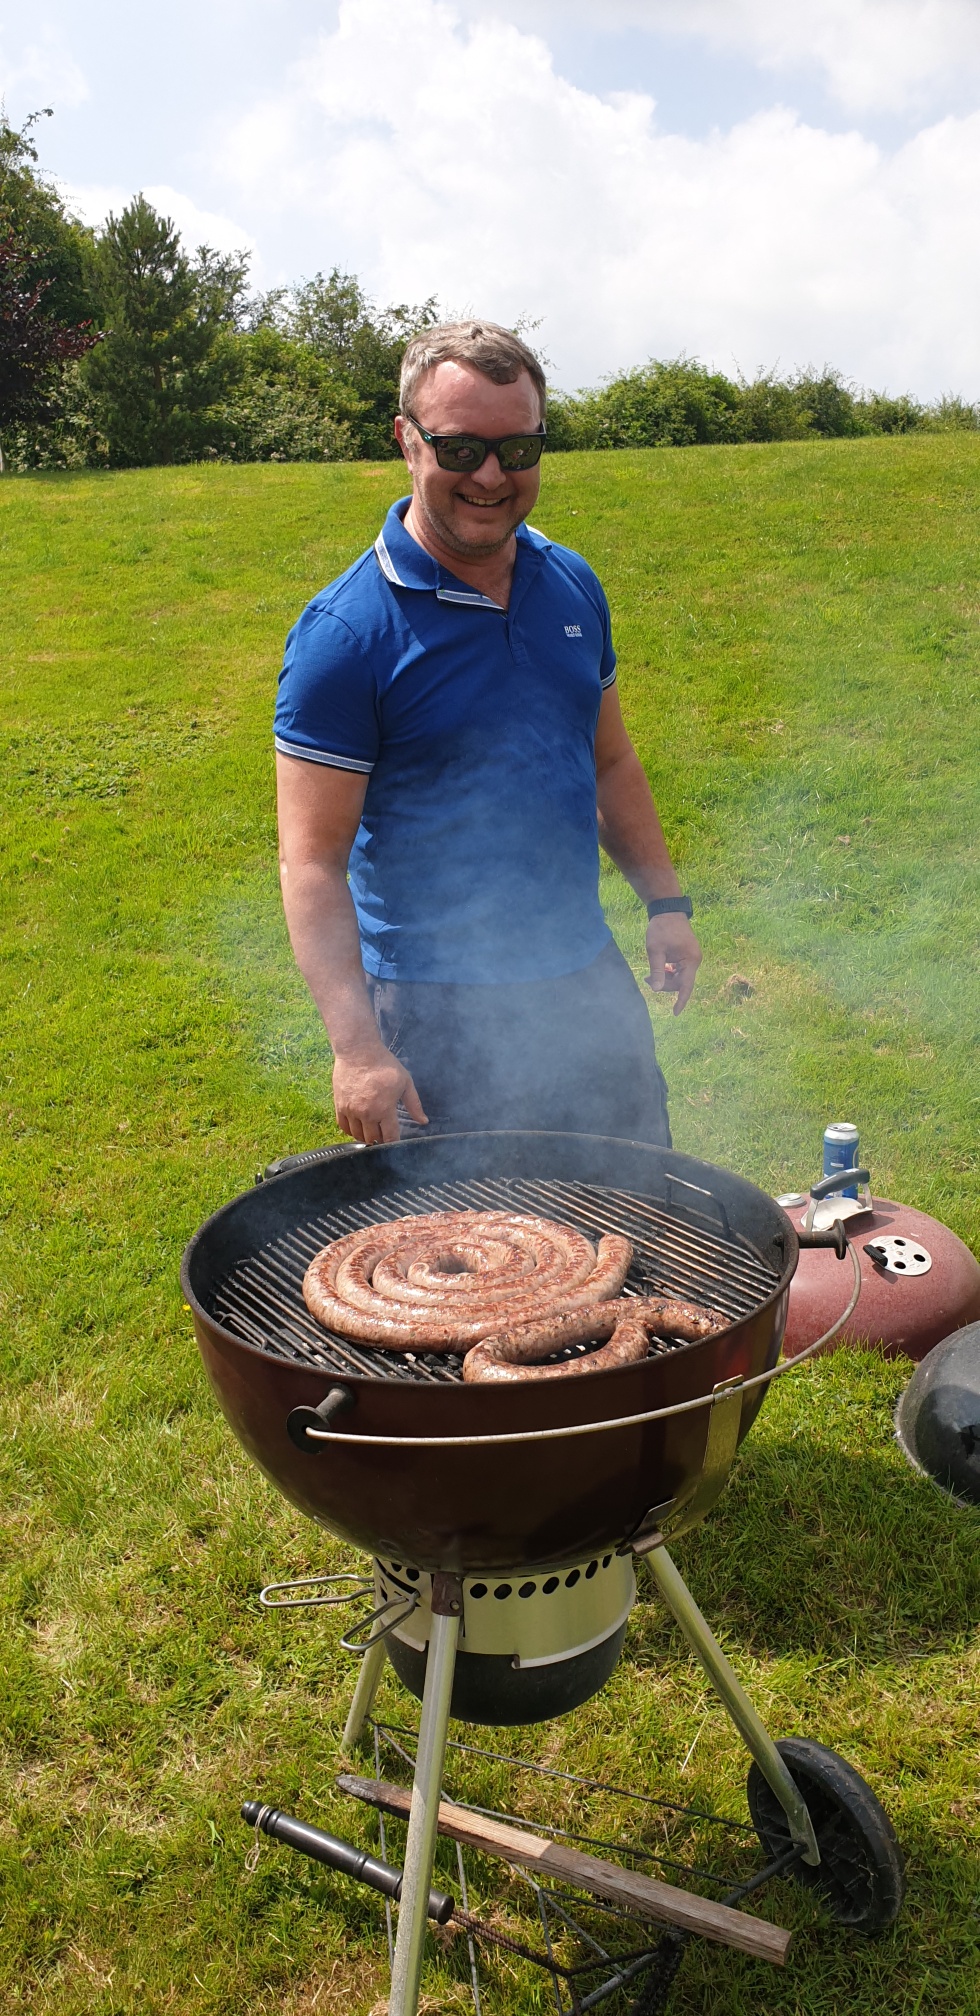 Friday Charity BBQ in the Yard Success!